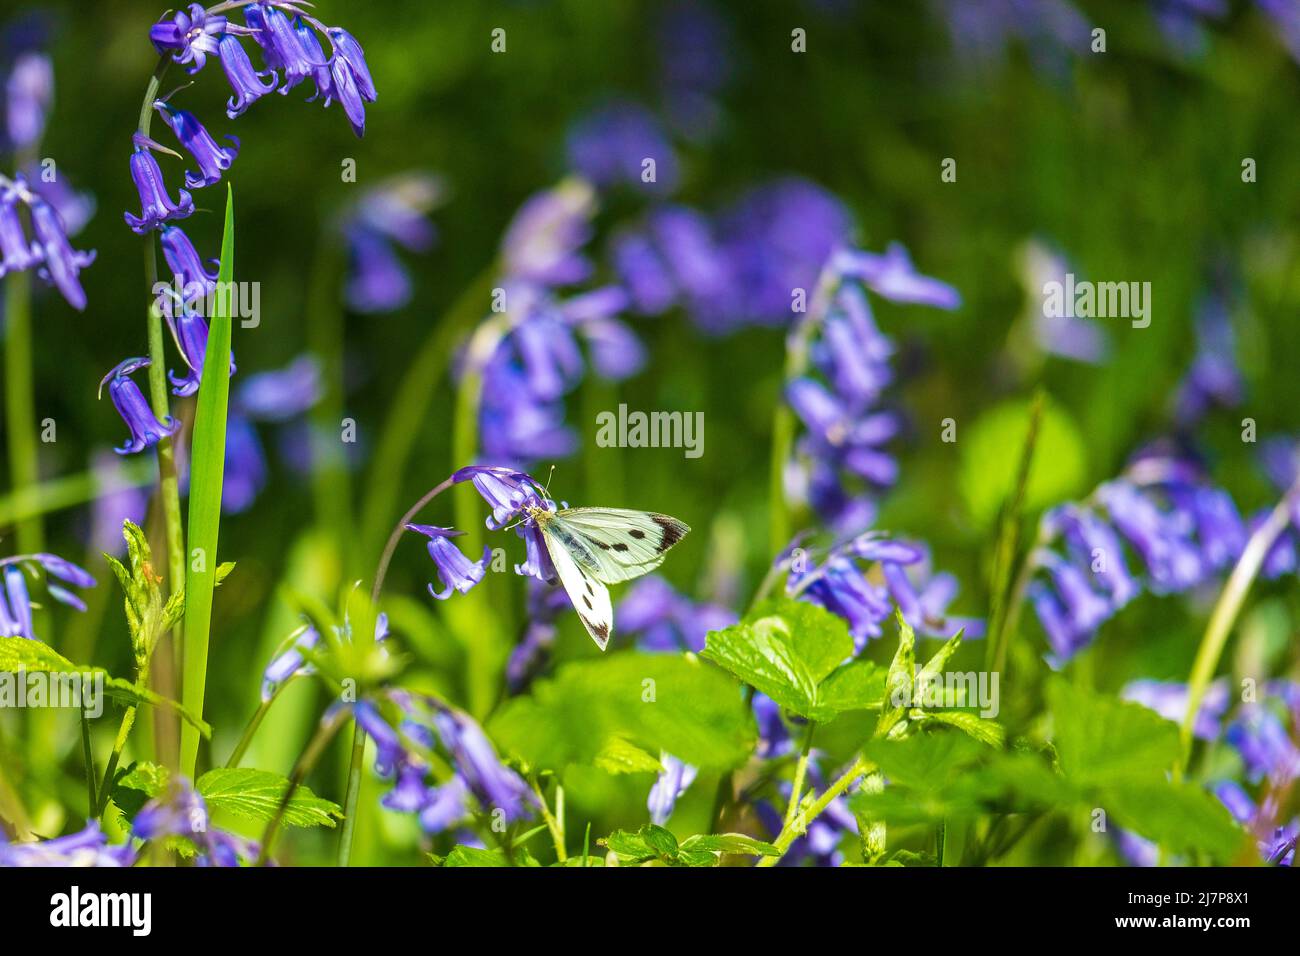 Female Large White (or Cabbage White) butterfly on bluebells Stock Photo